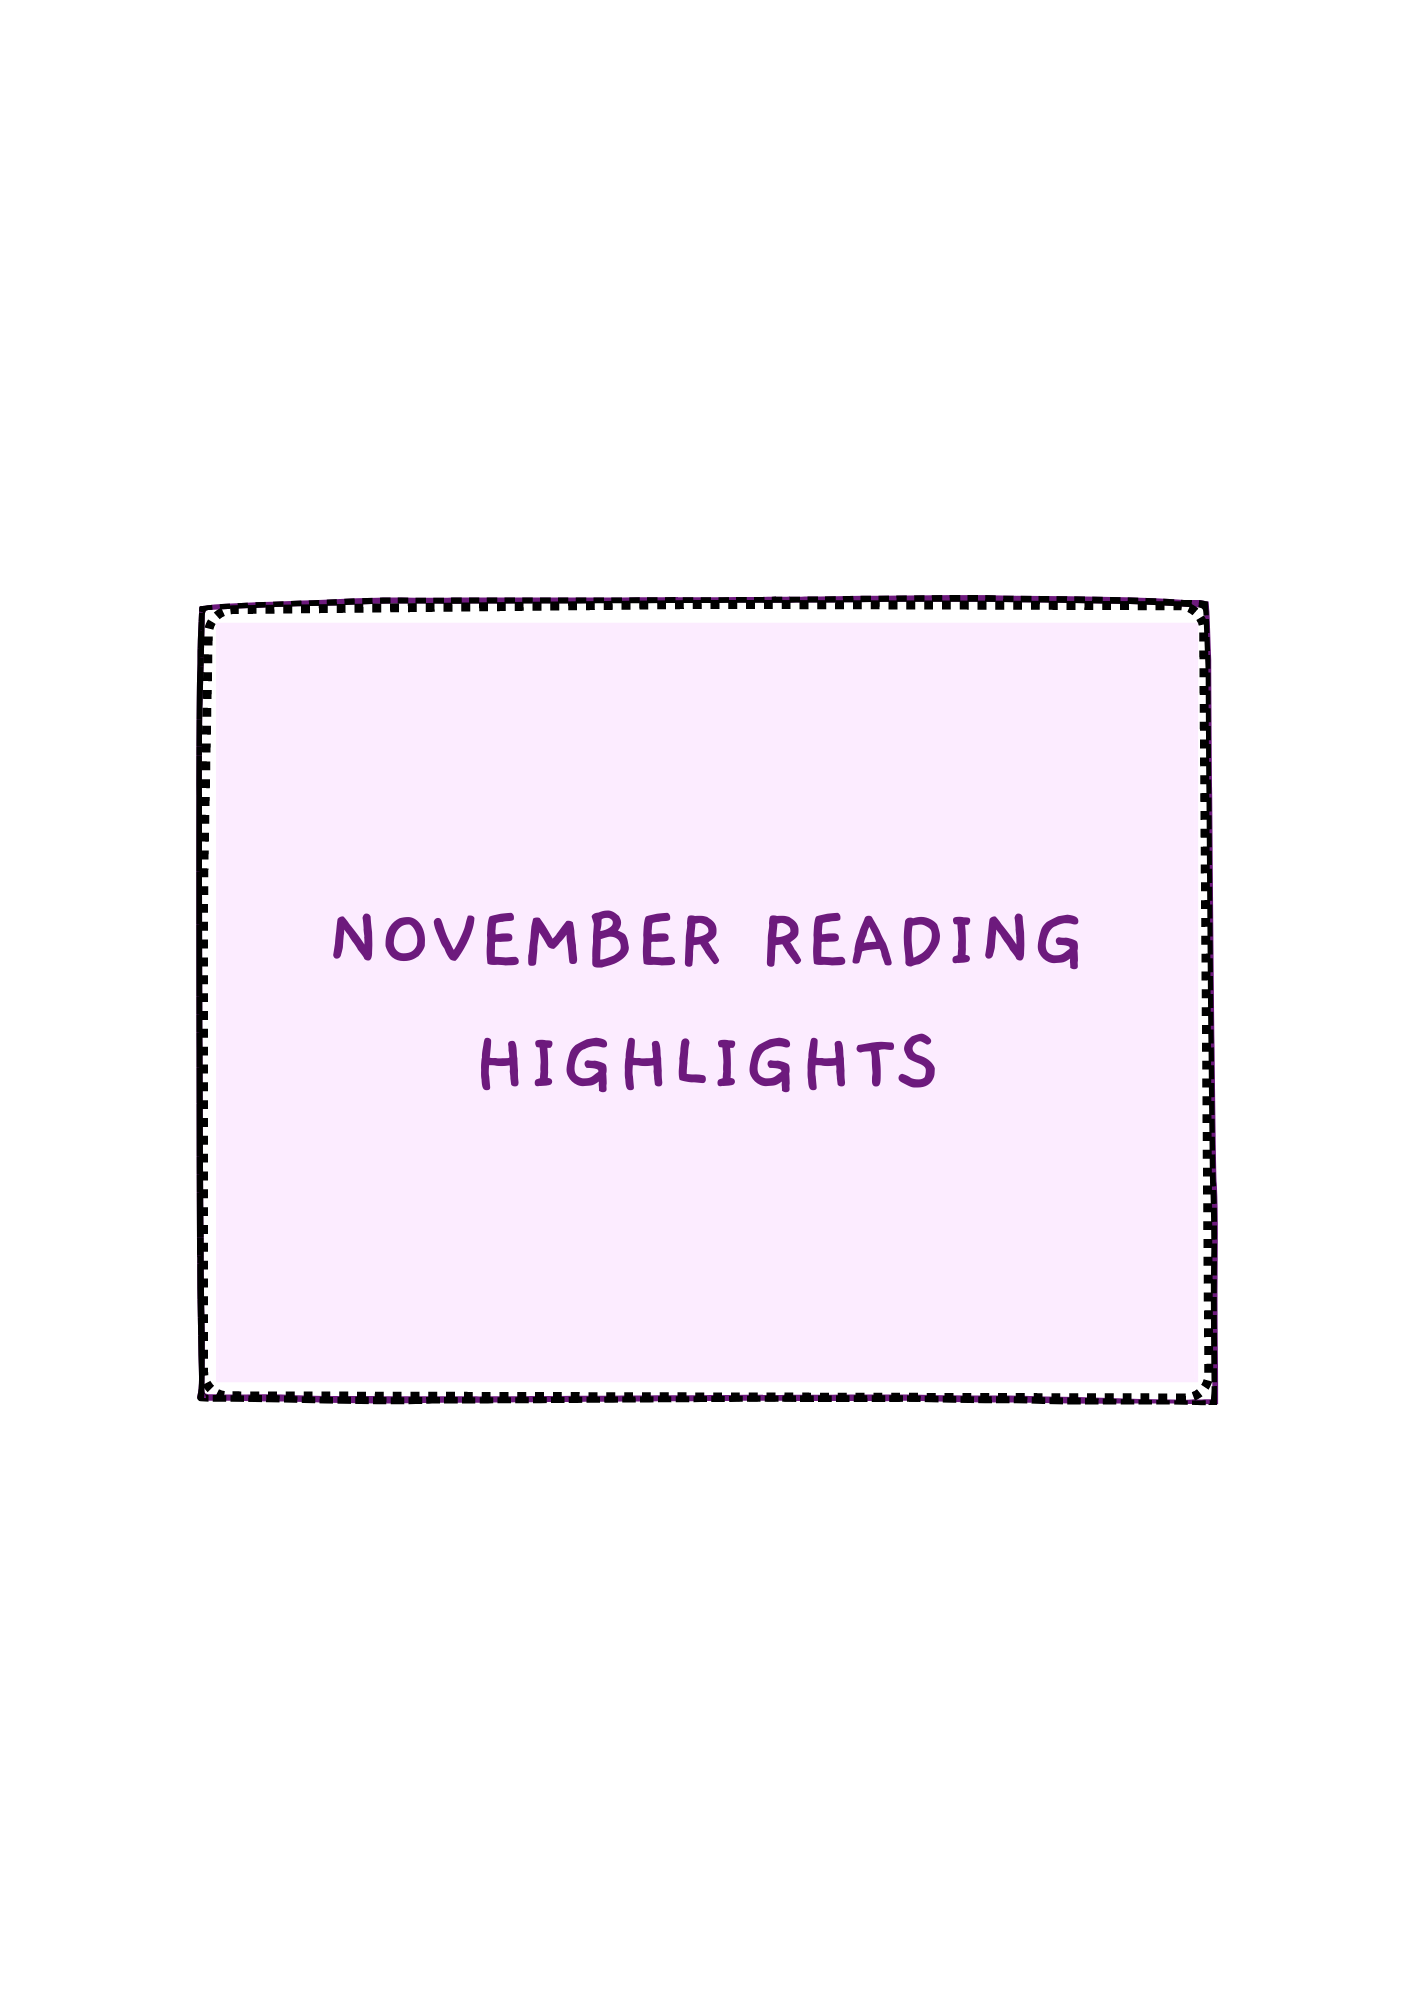 Monthly Reading Journal Printable | Printable Reading Journal | A4 Reading Journal | Kawaii Reading Journal